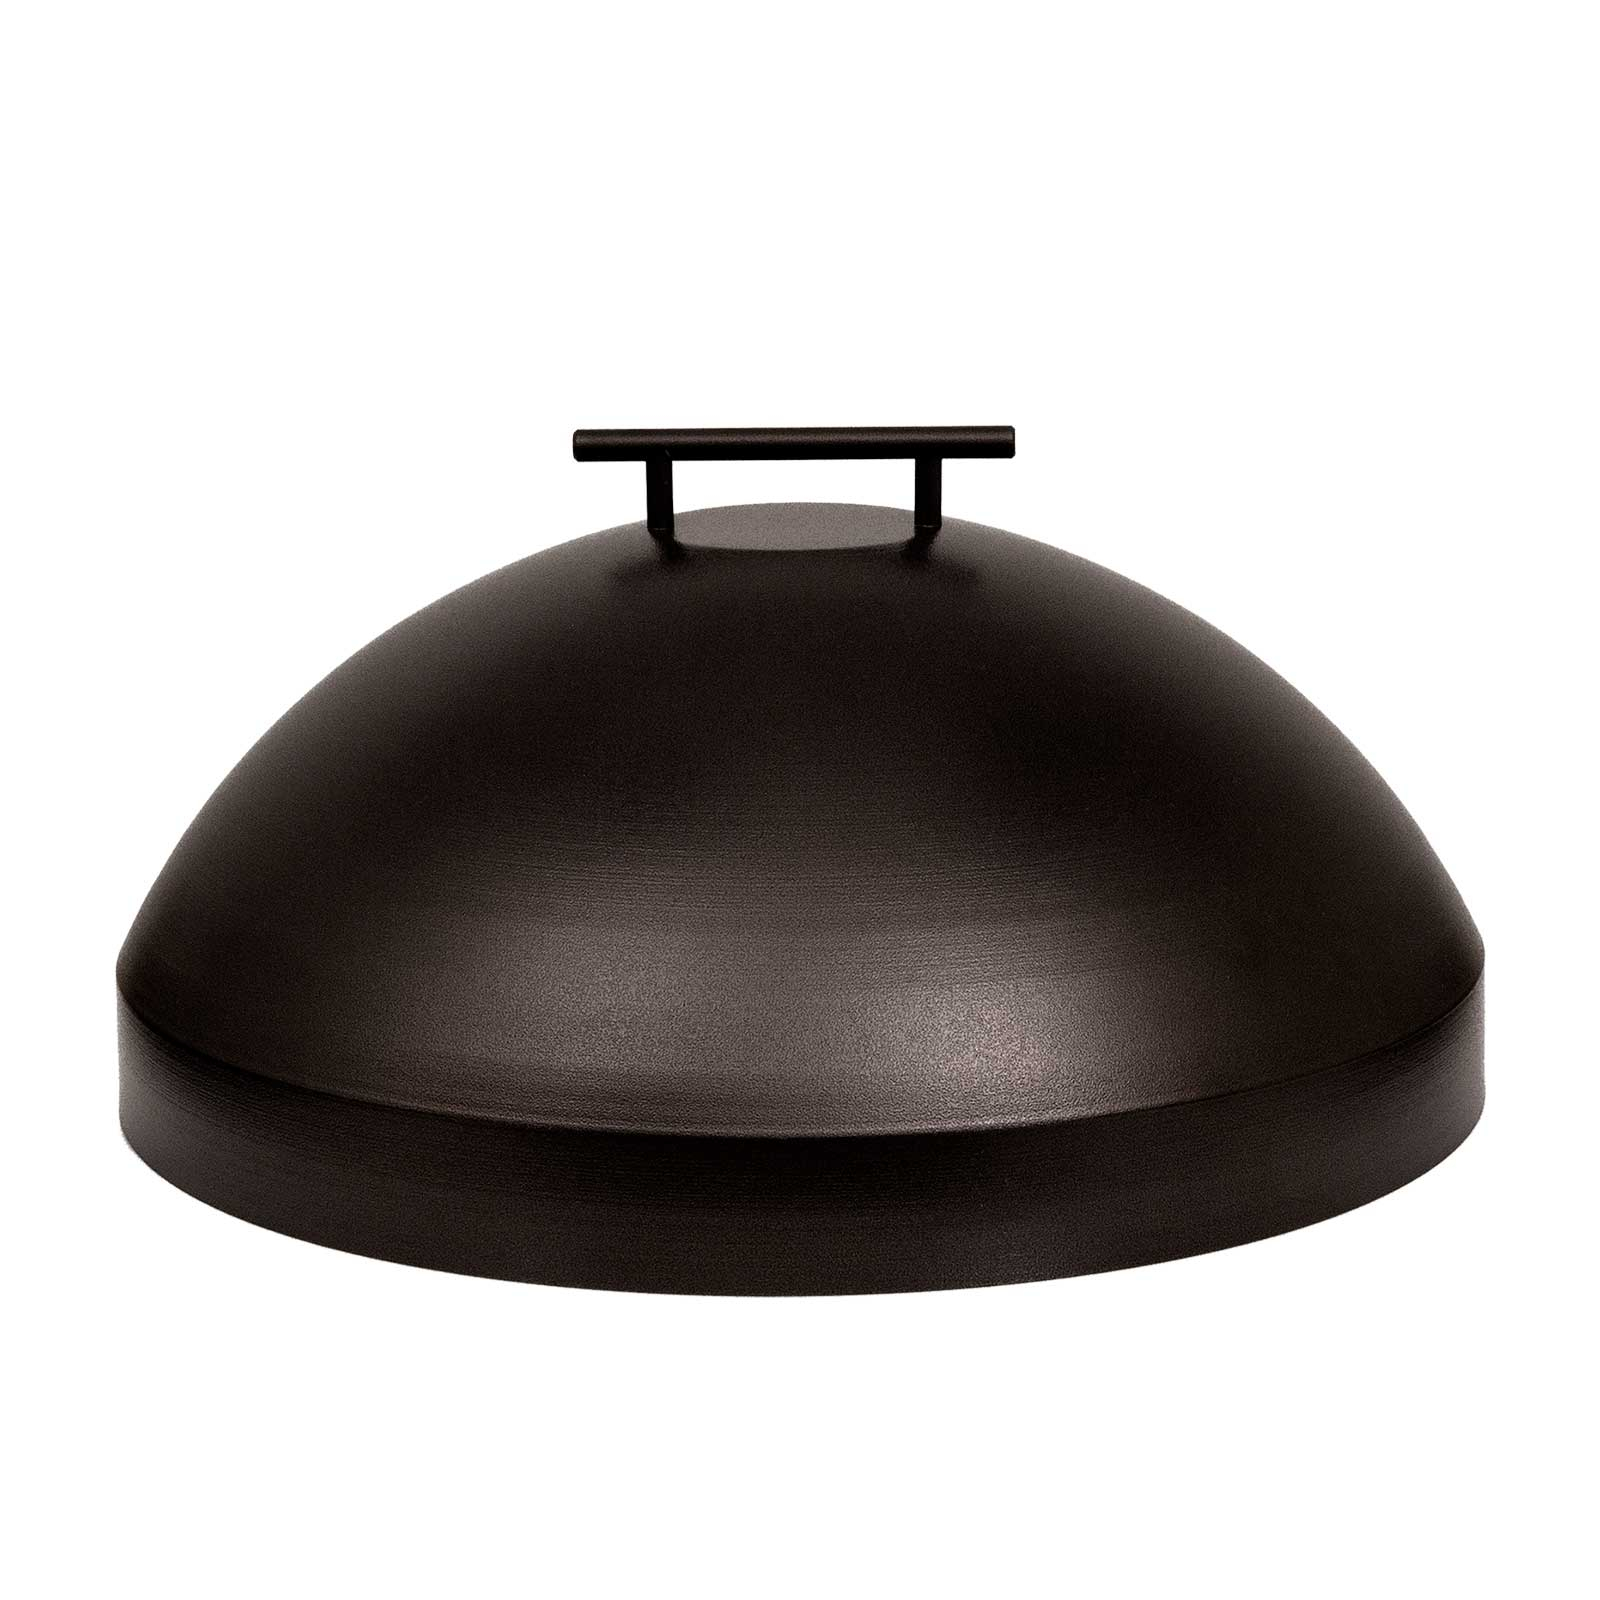 Ow Lee 20 Espresso Metal Dome Fire Pit Cover Fire Heat within proportions 1600 X 1600